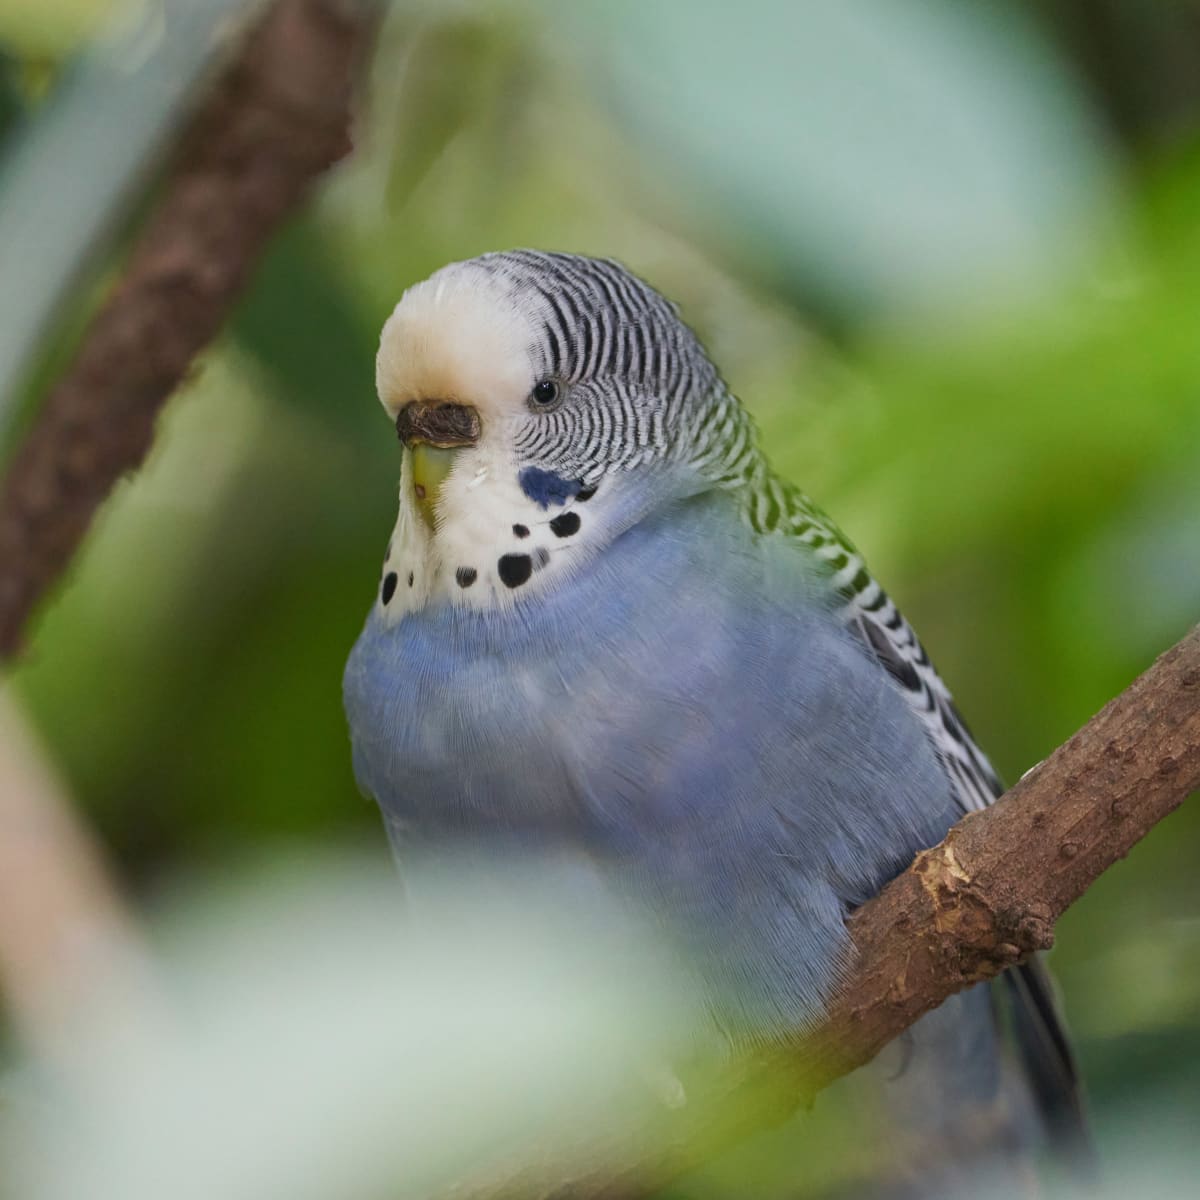 Is My Budgie a Boy or a Girl? (Photo Identification Guide)